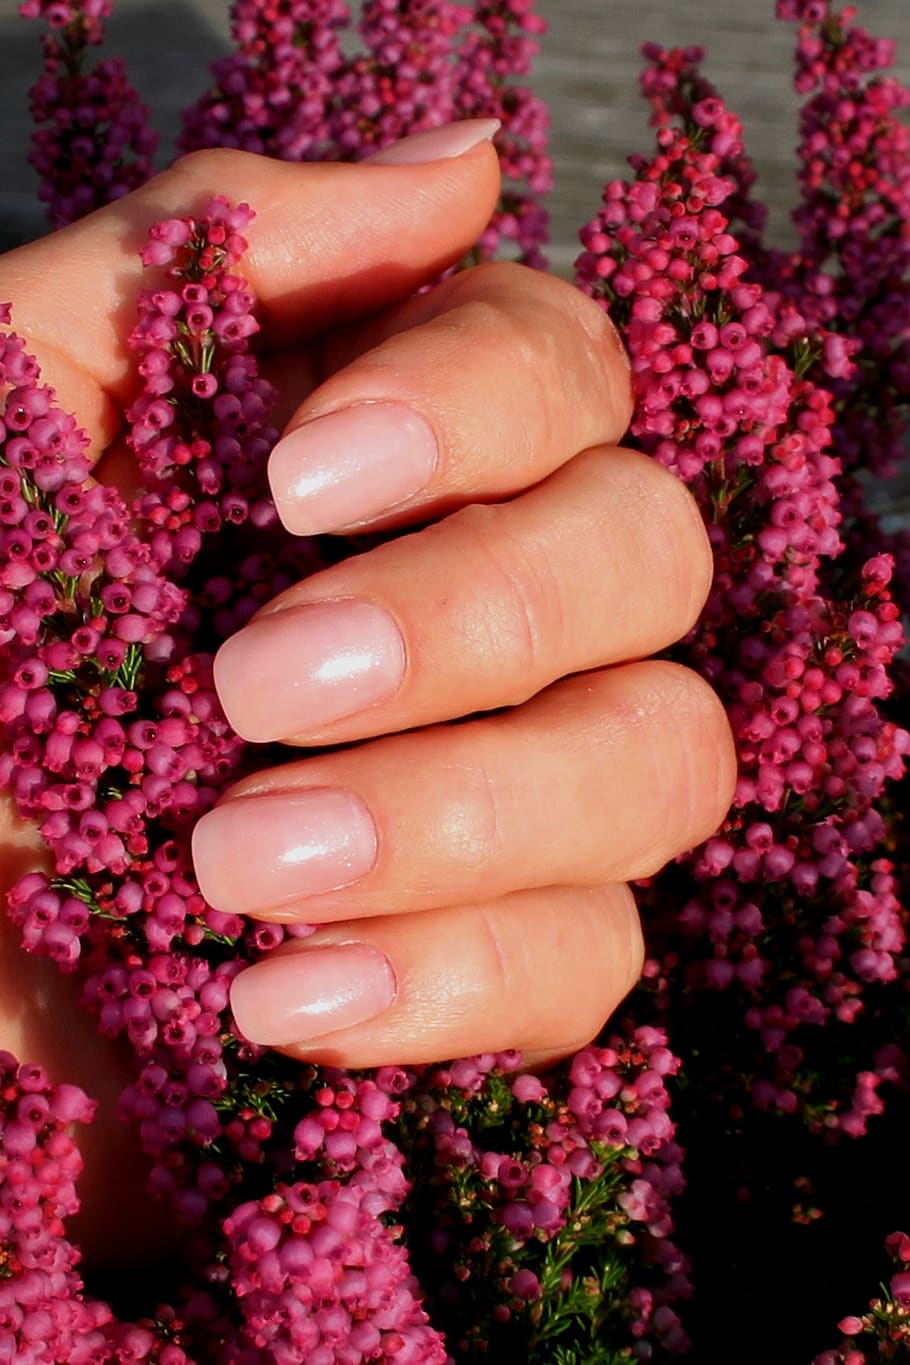 fingernails, baby boomers, manicure, nail design, nail varnish, flower, flowering plant, pink color, human hand, human body part